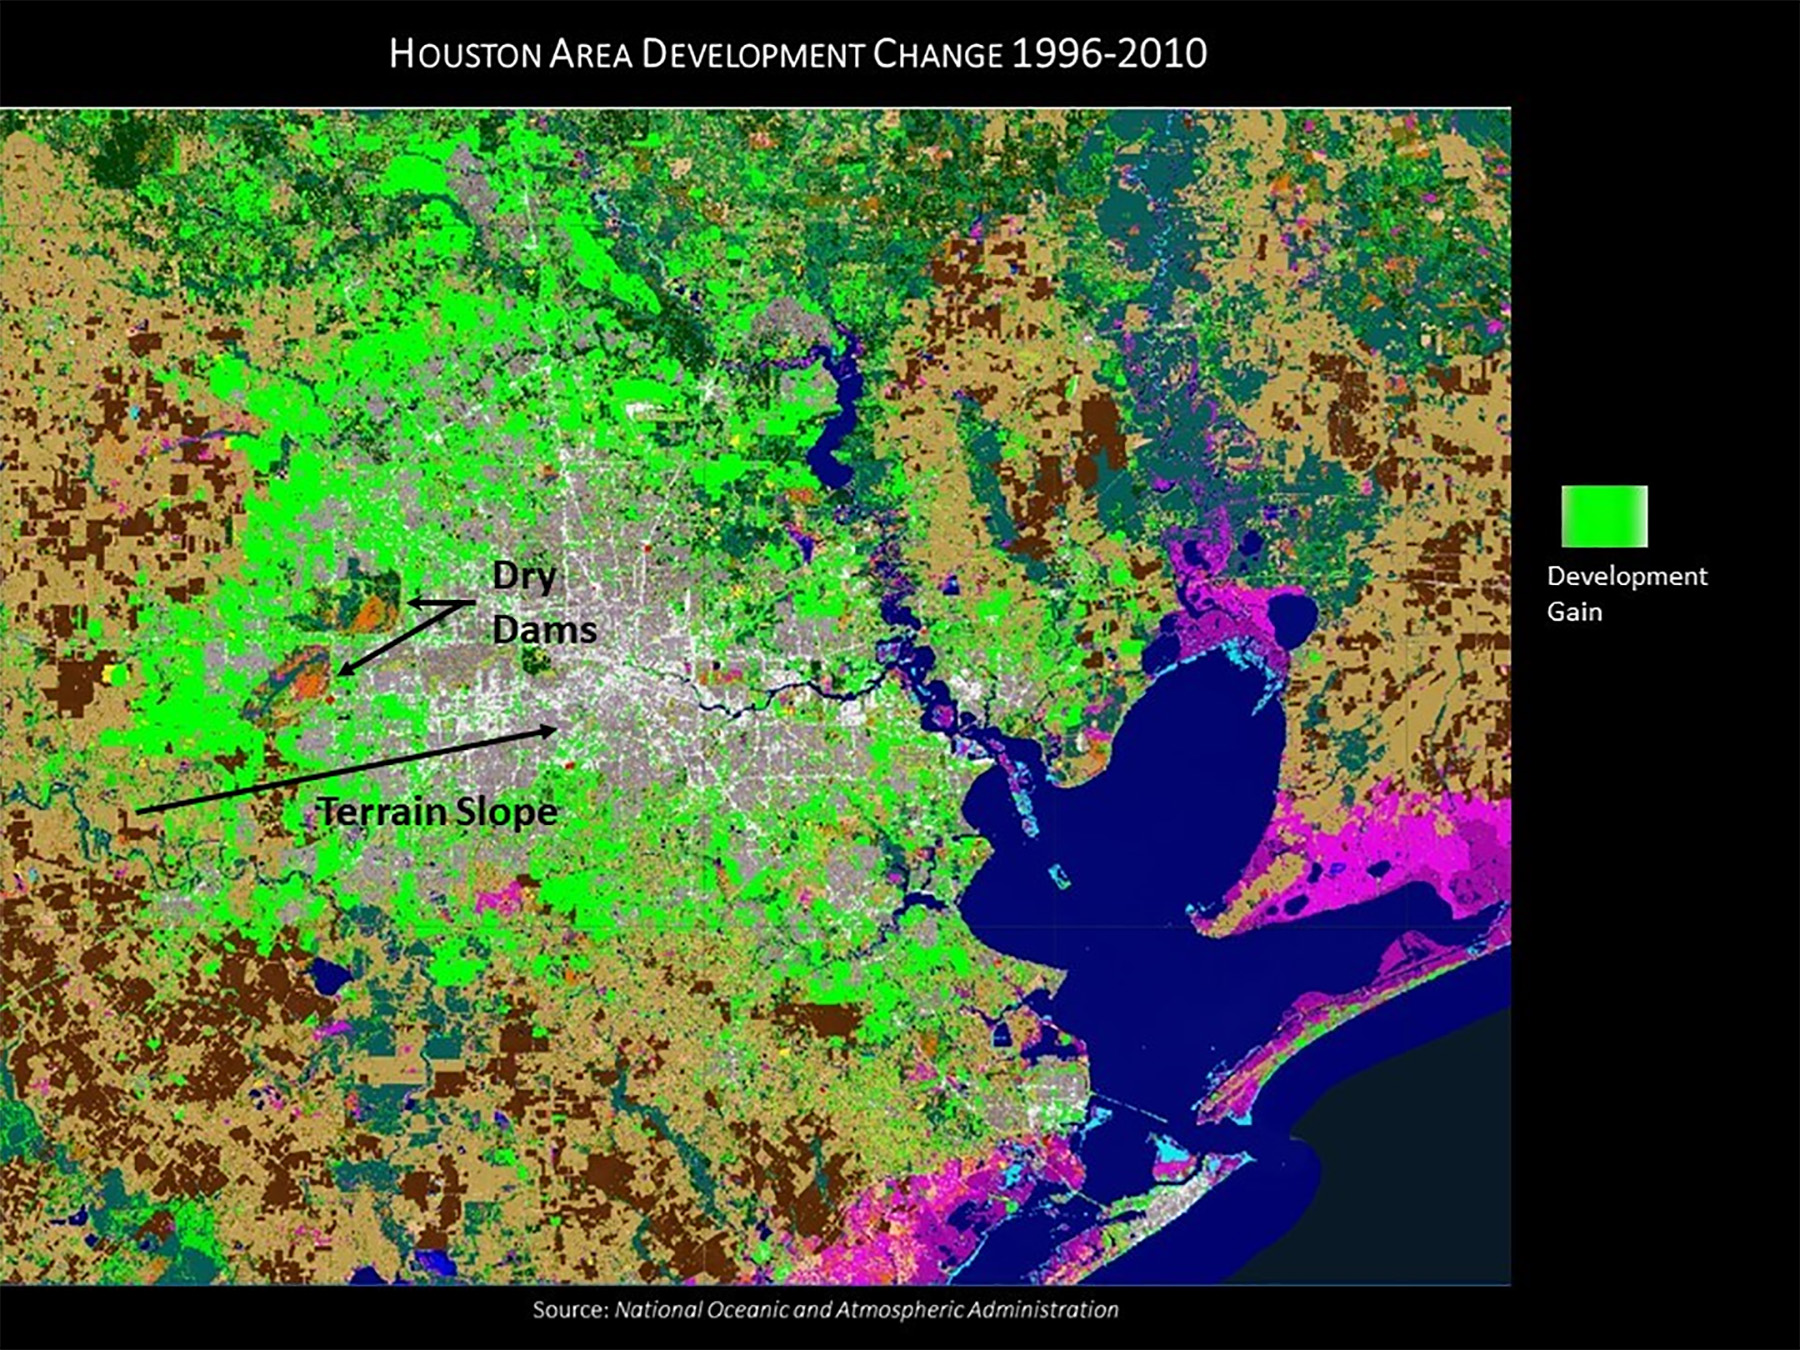 A multicolored map shows the growth of development in the Houston area from 1996 to 2010. 